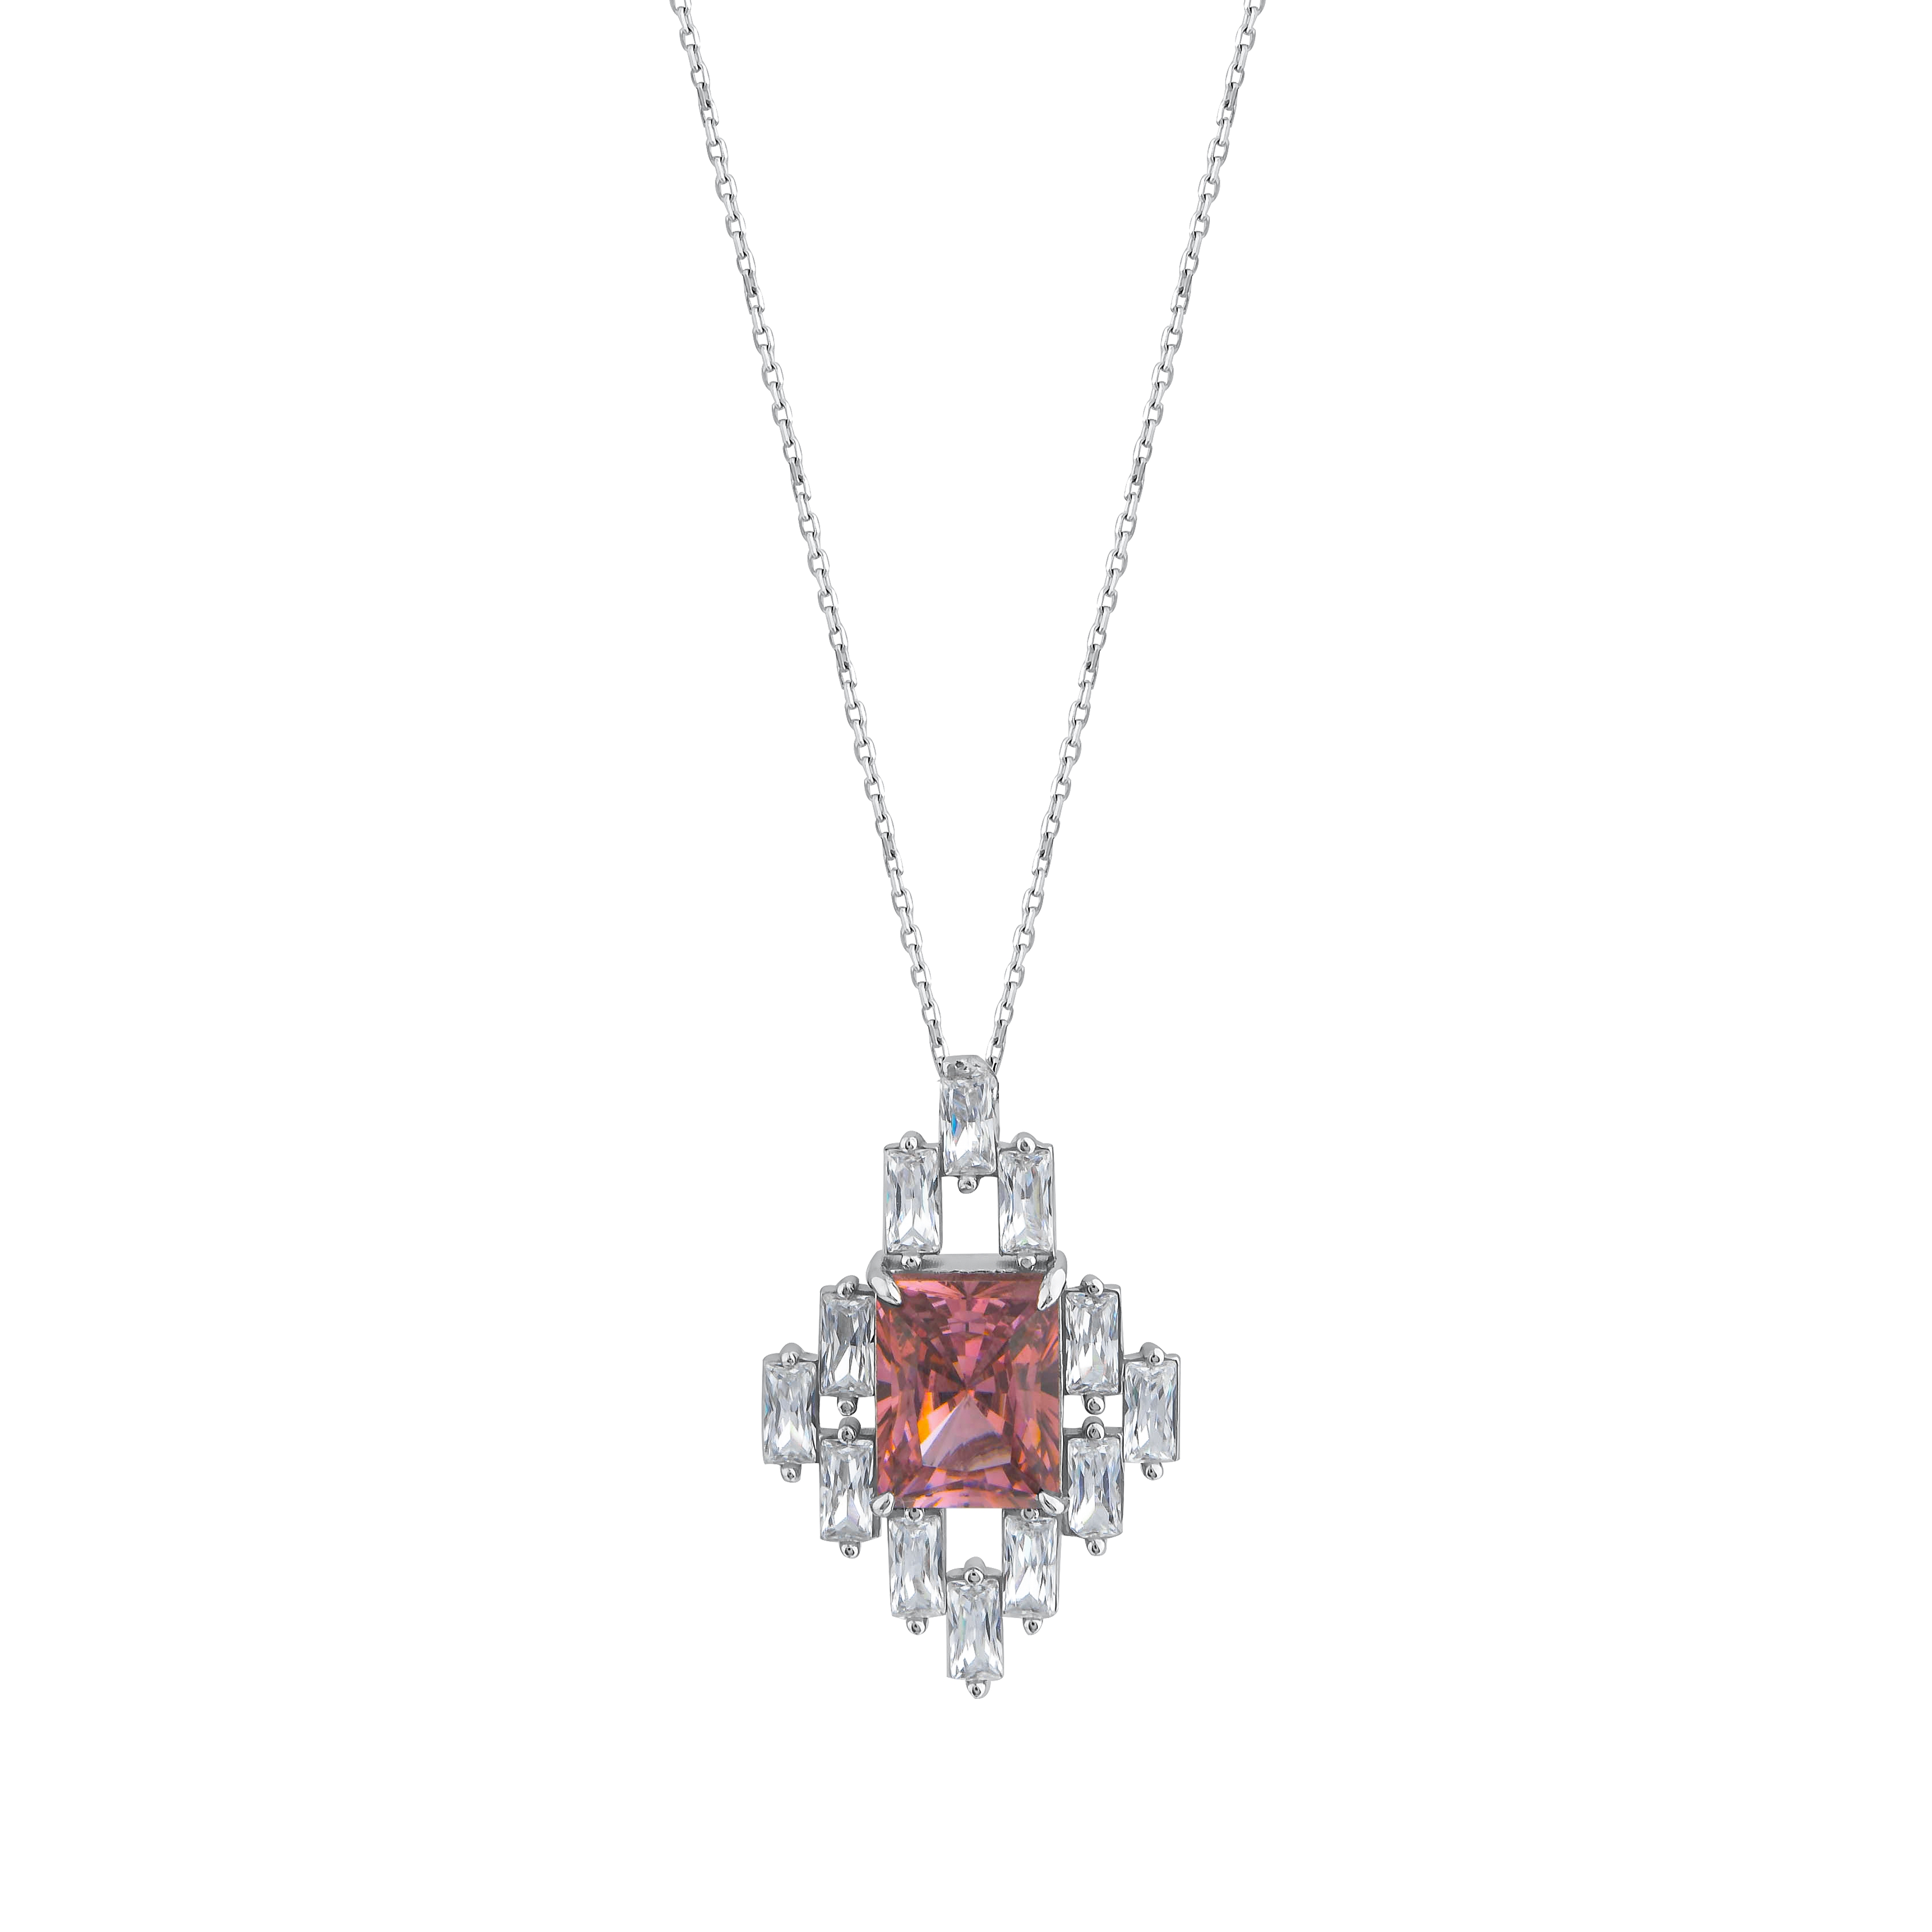 Created  Rhodolite Stone Clarit Jewellery 14K  White Gold Necklace